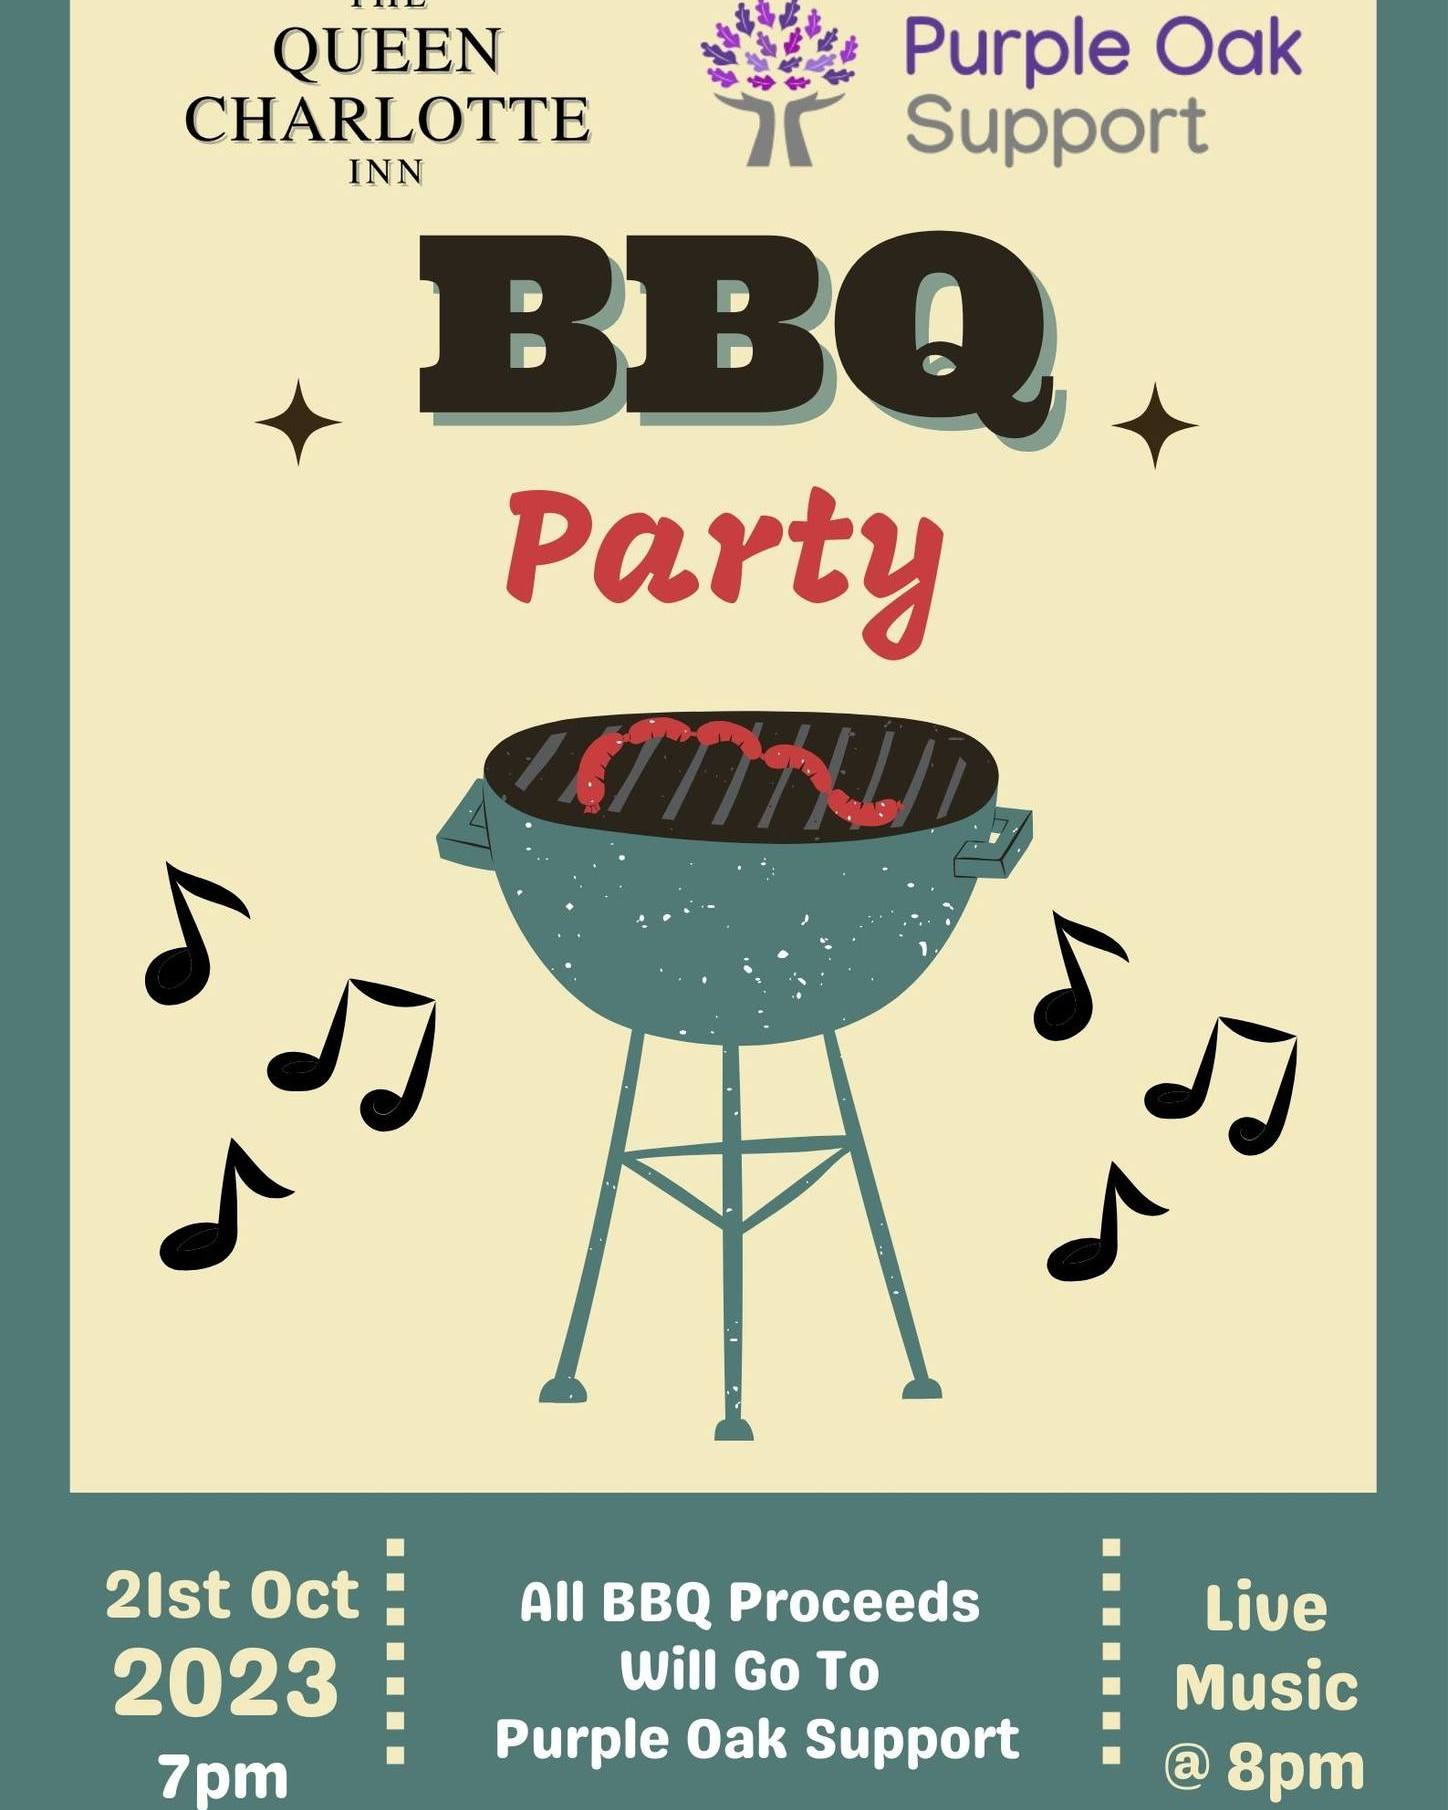 Charity BBQ Party with live music by DANNY CONNORS